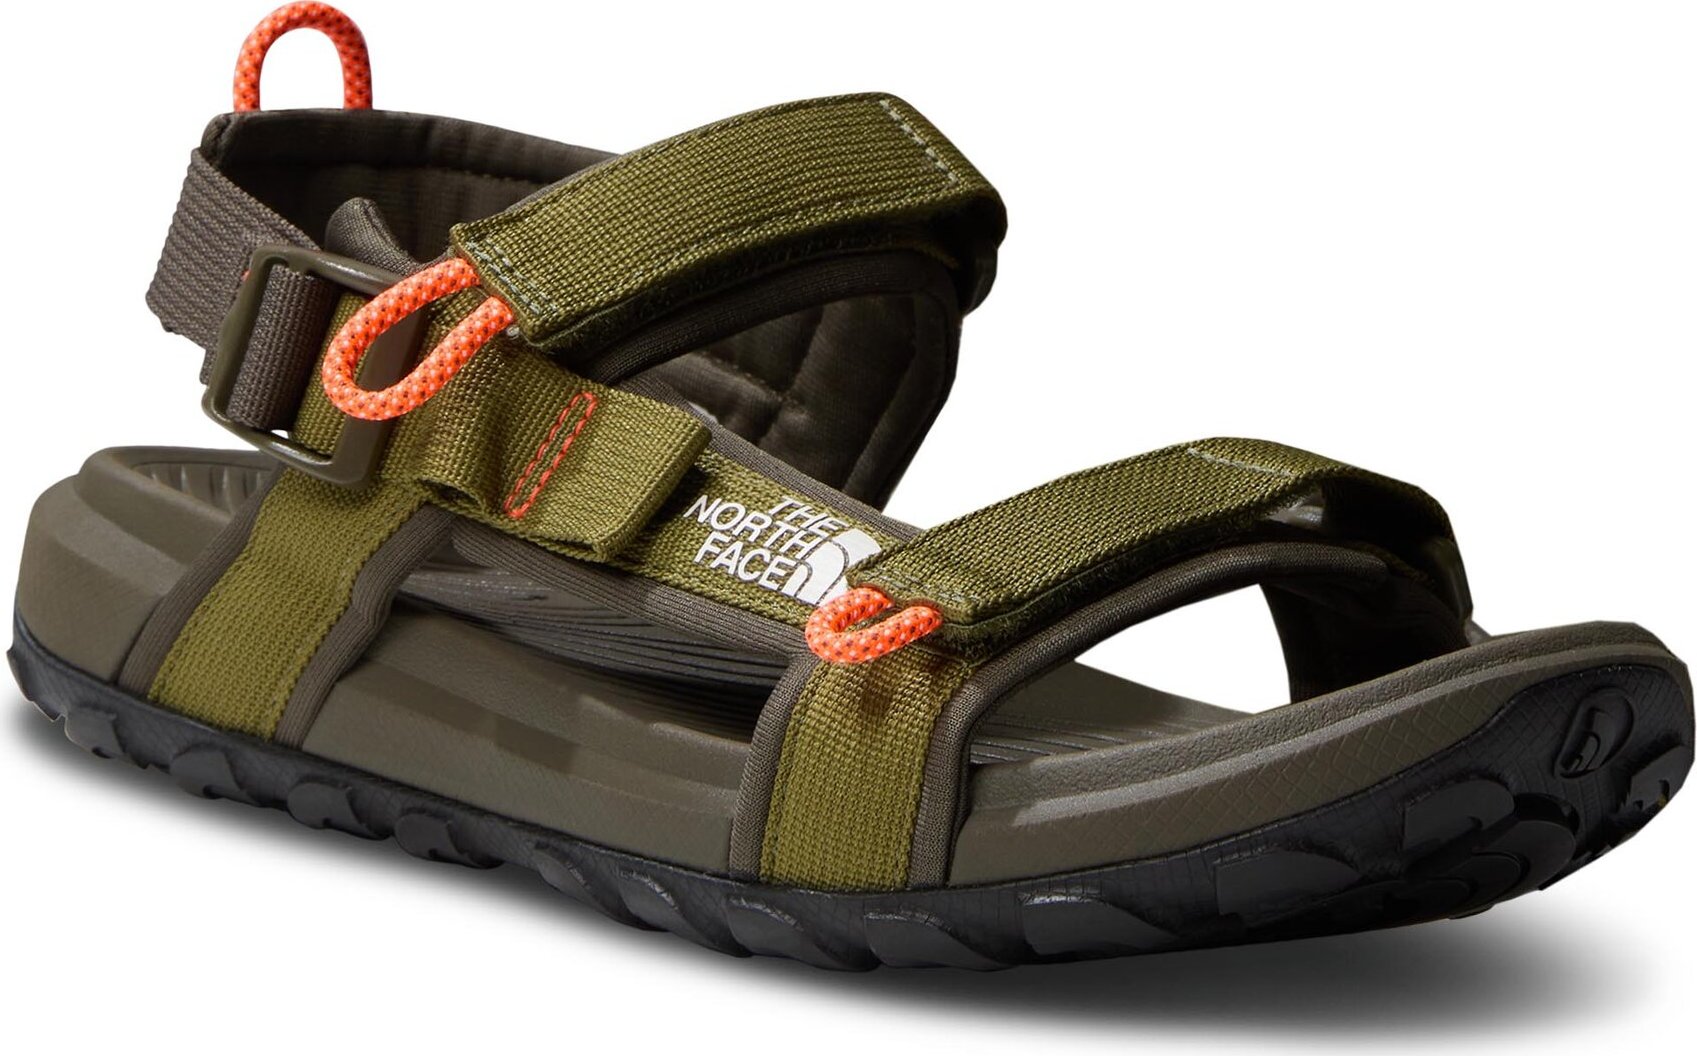 Sandály The North Face M Explore Camp Sandal NF0A8A8XV2I1 Forest Olive/New Taupe